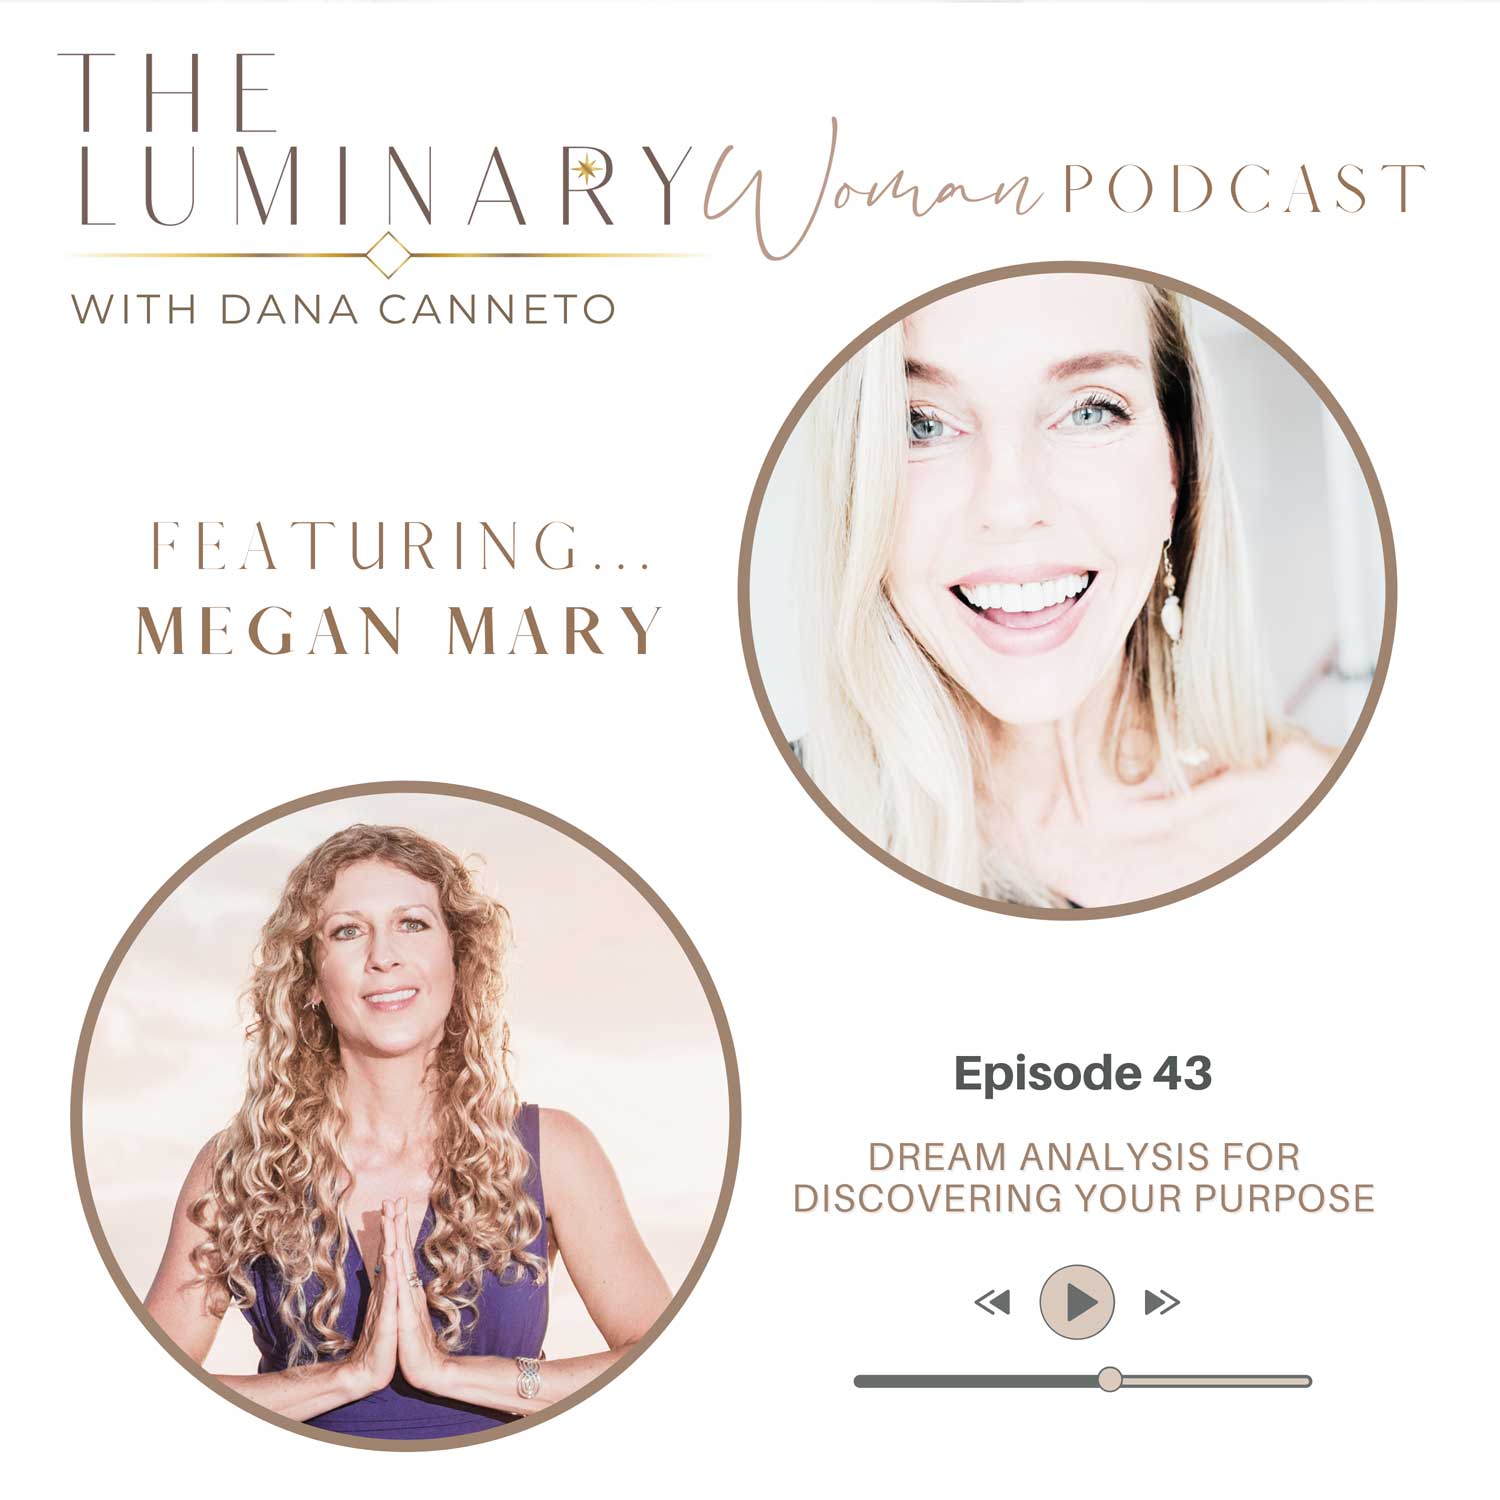 Guest Appearance: The Luminary Woman Podcast